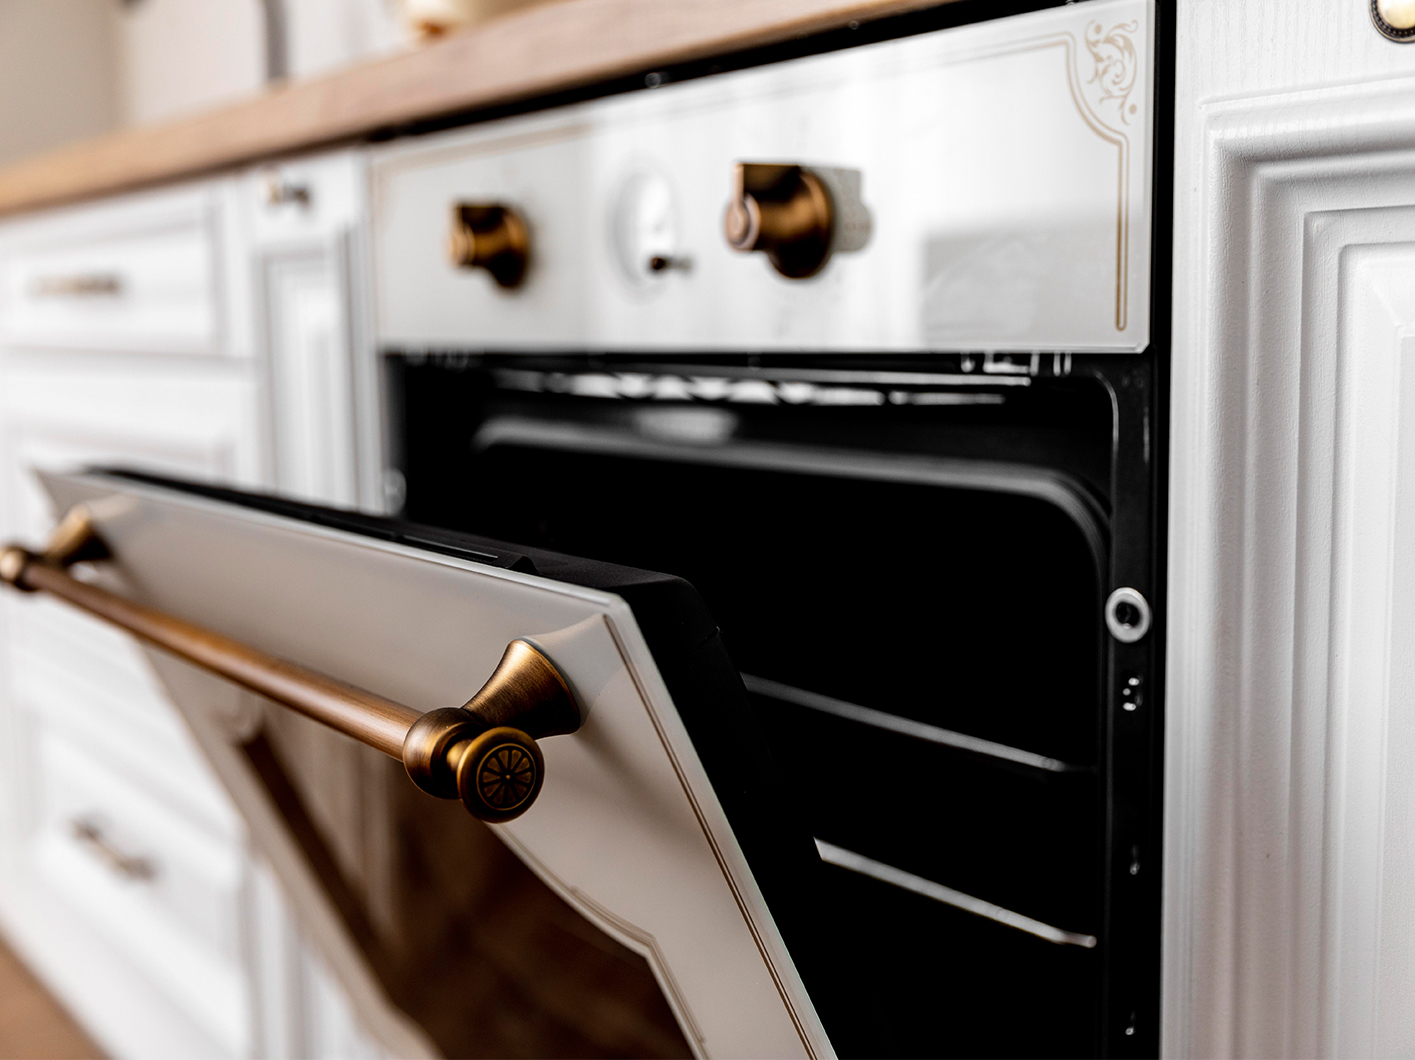 Cooking Range care tips and repair services